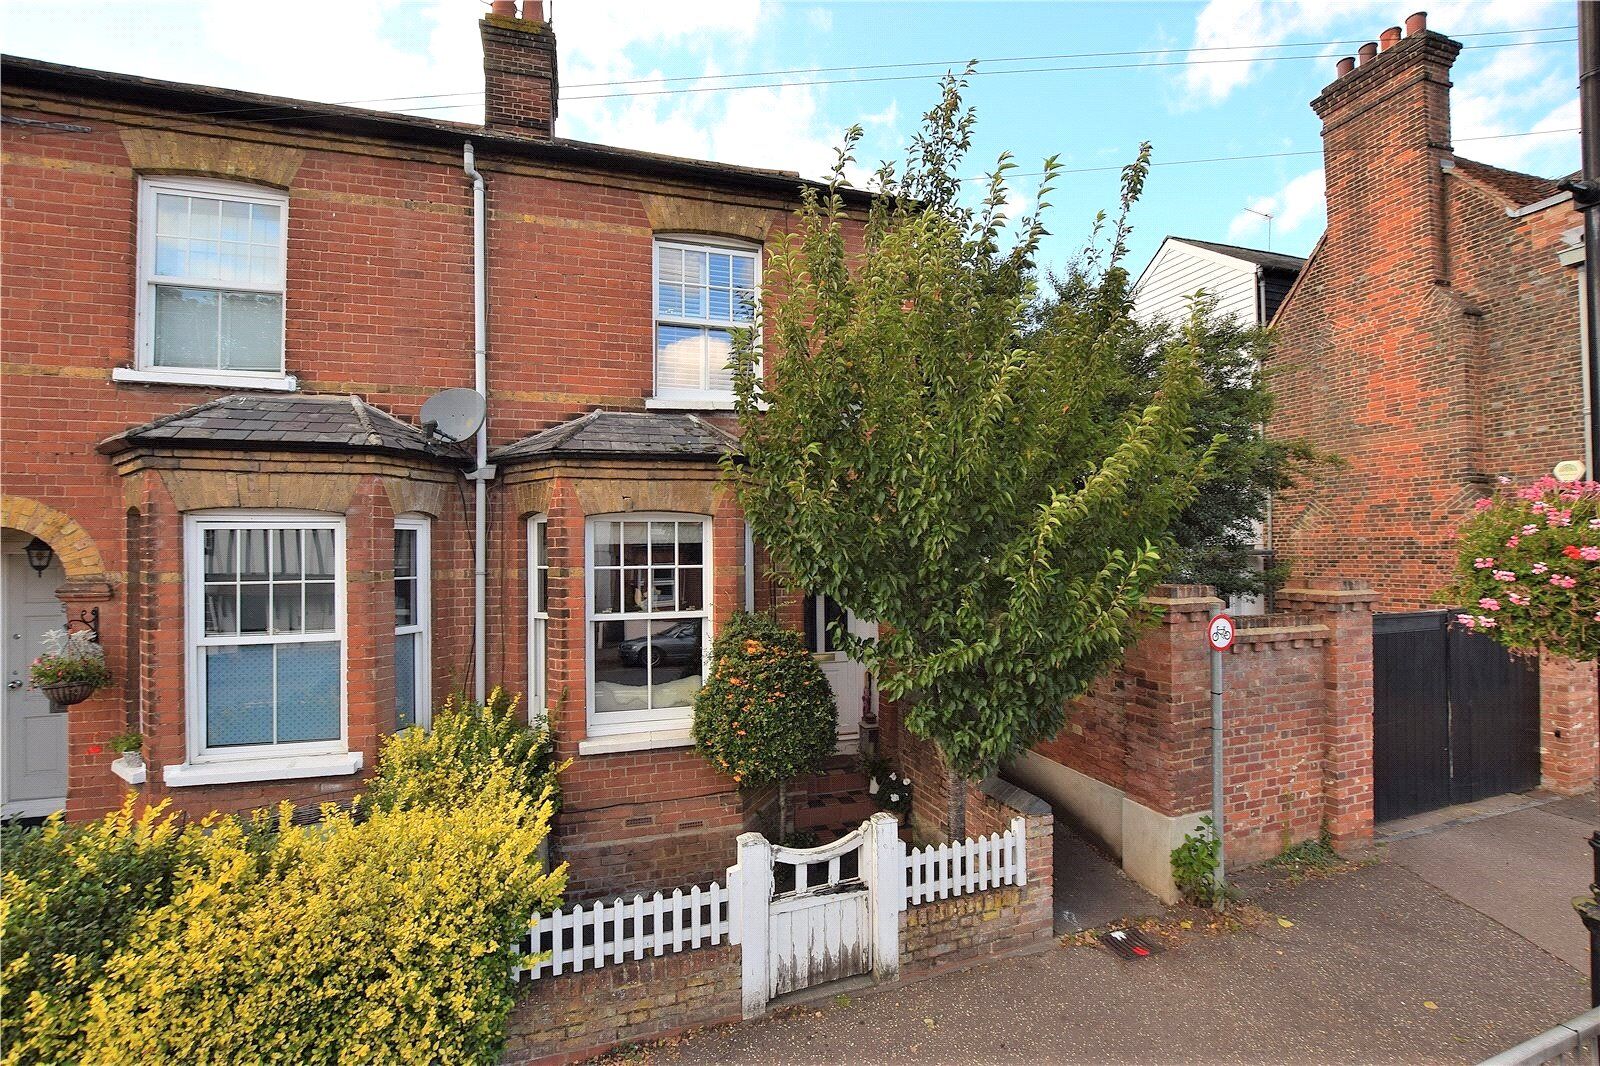 2 bedroom end terraced house for sale Lower Street, Stansted, CM24, main image